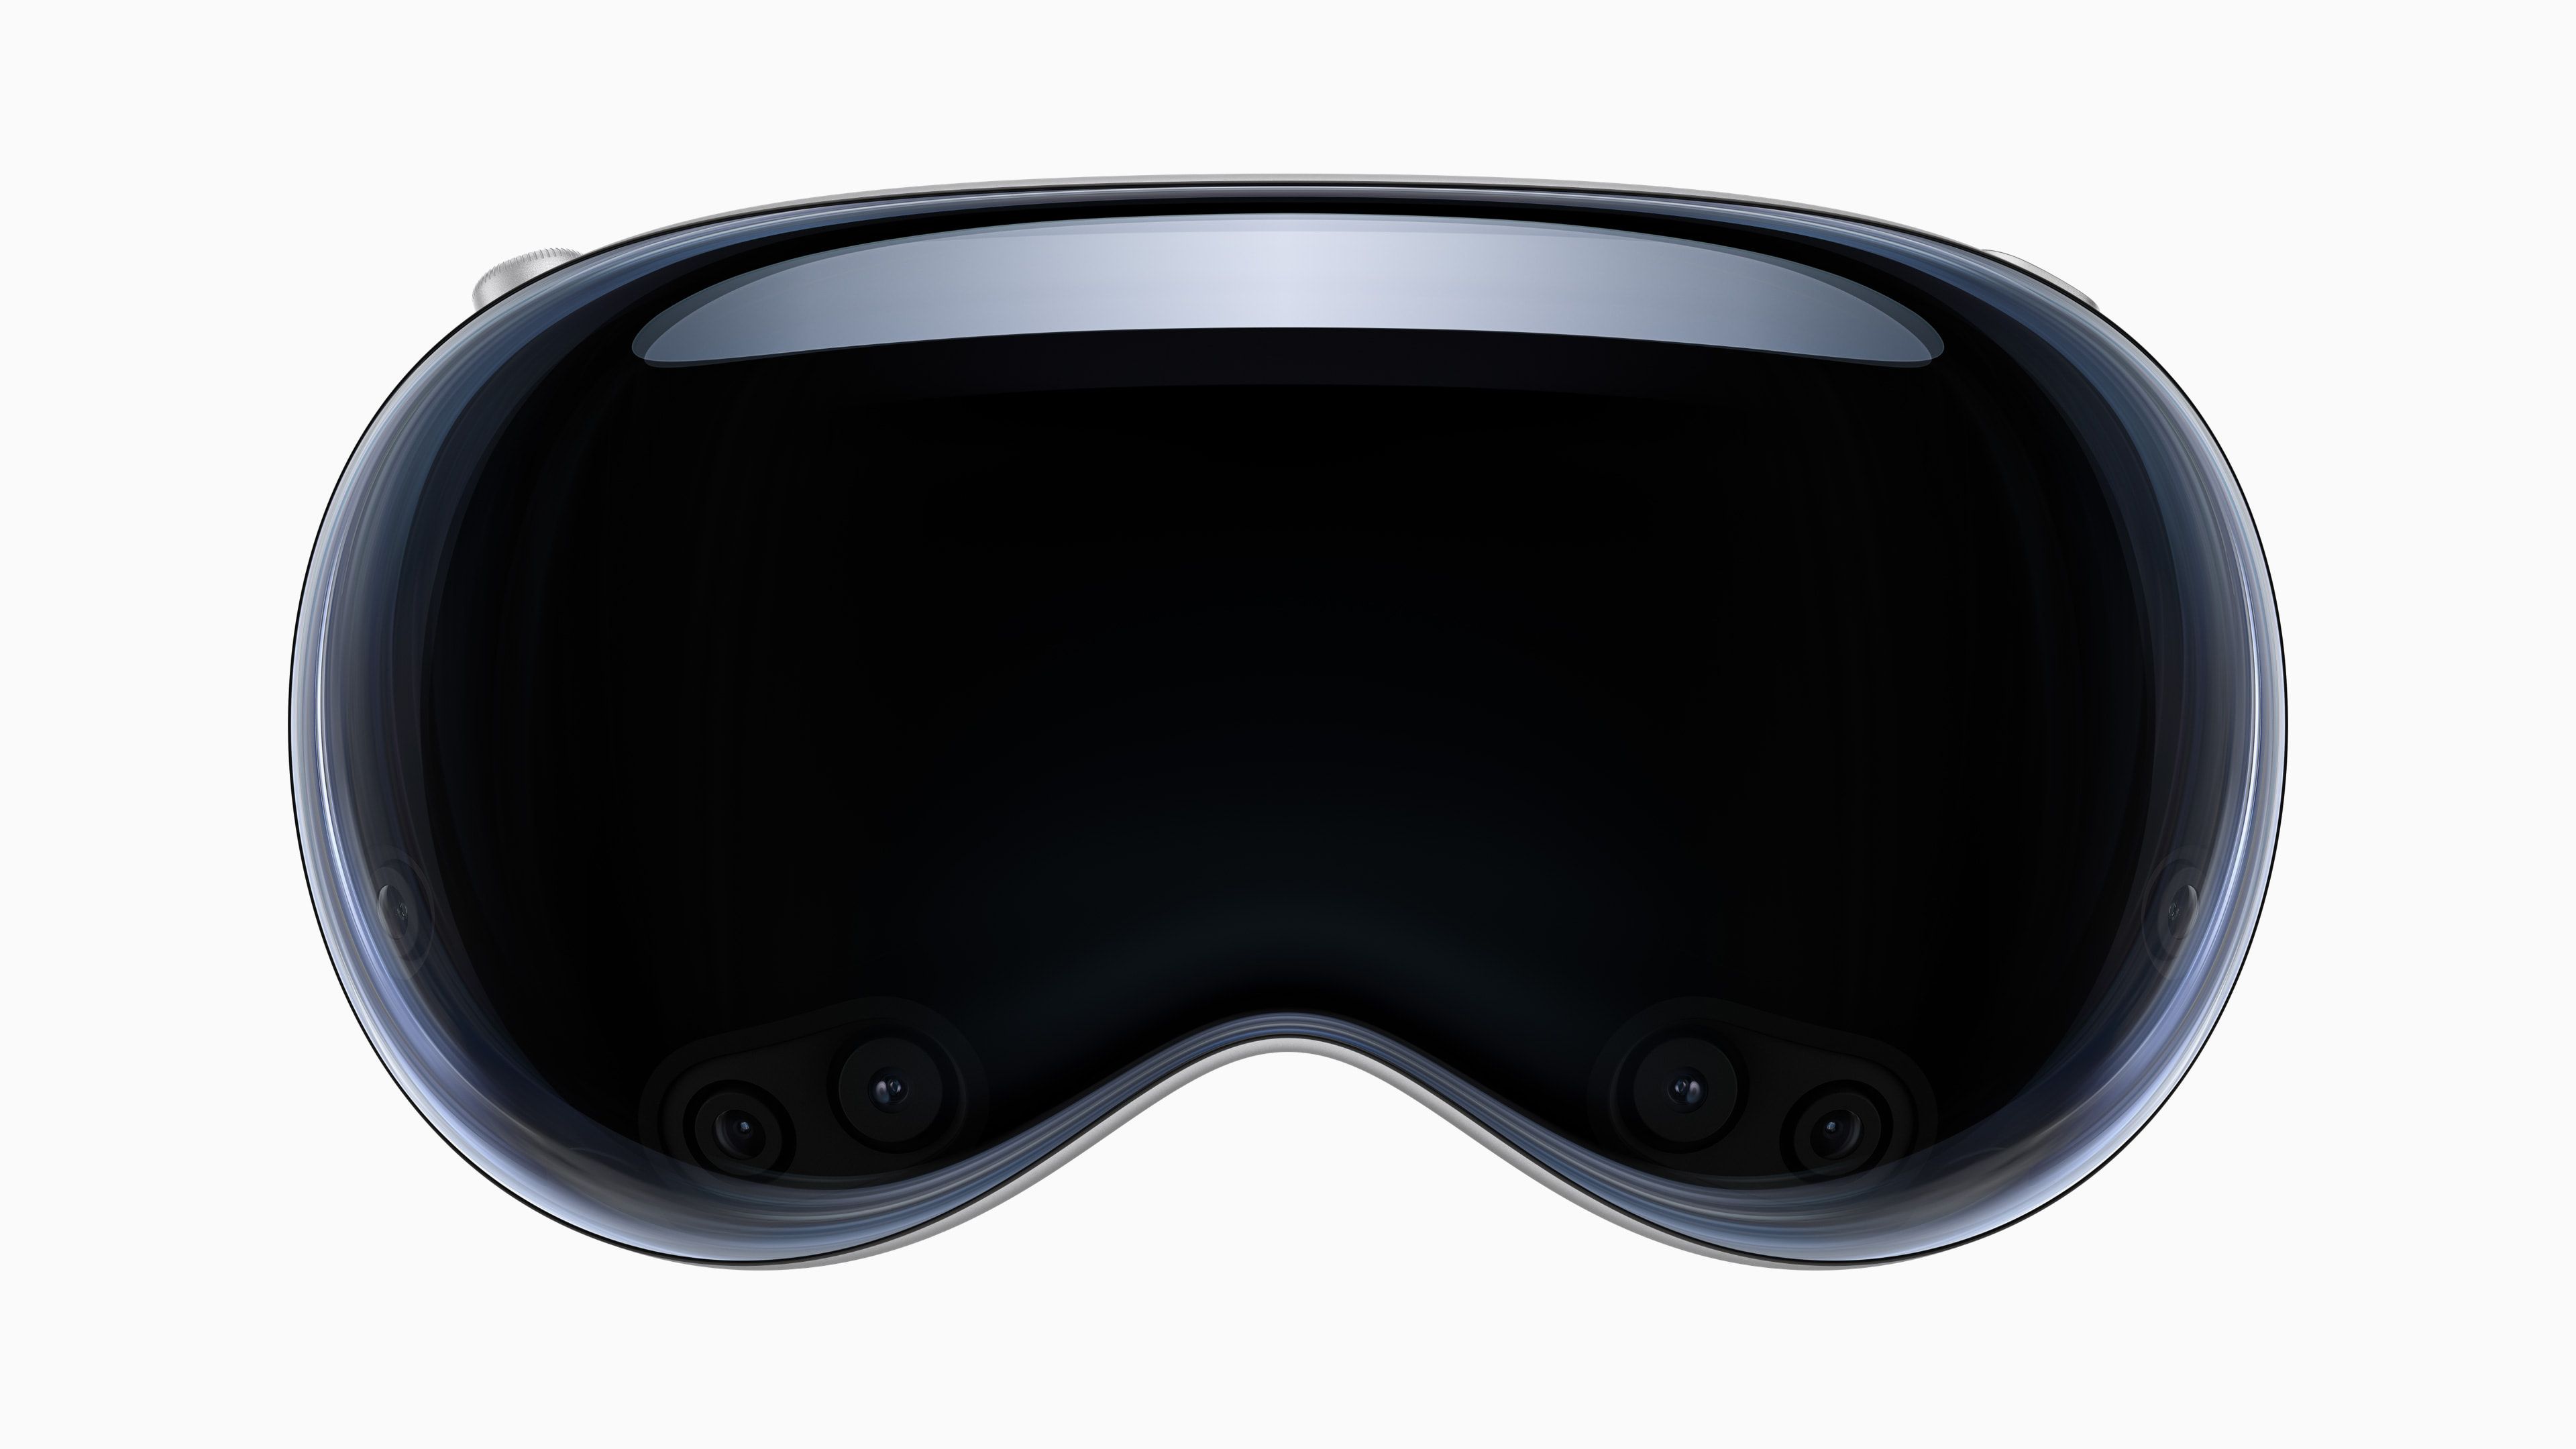 Image of the Apple Vision Pro Glasses